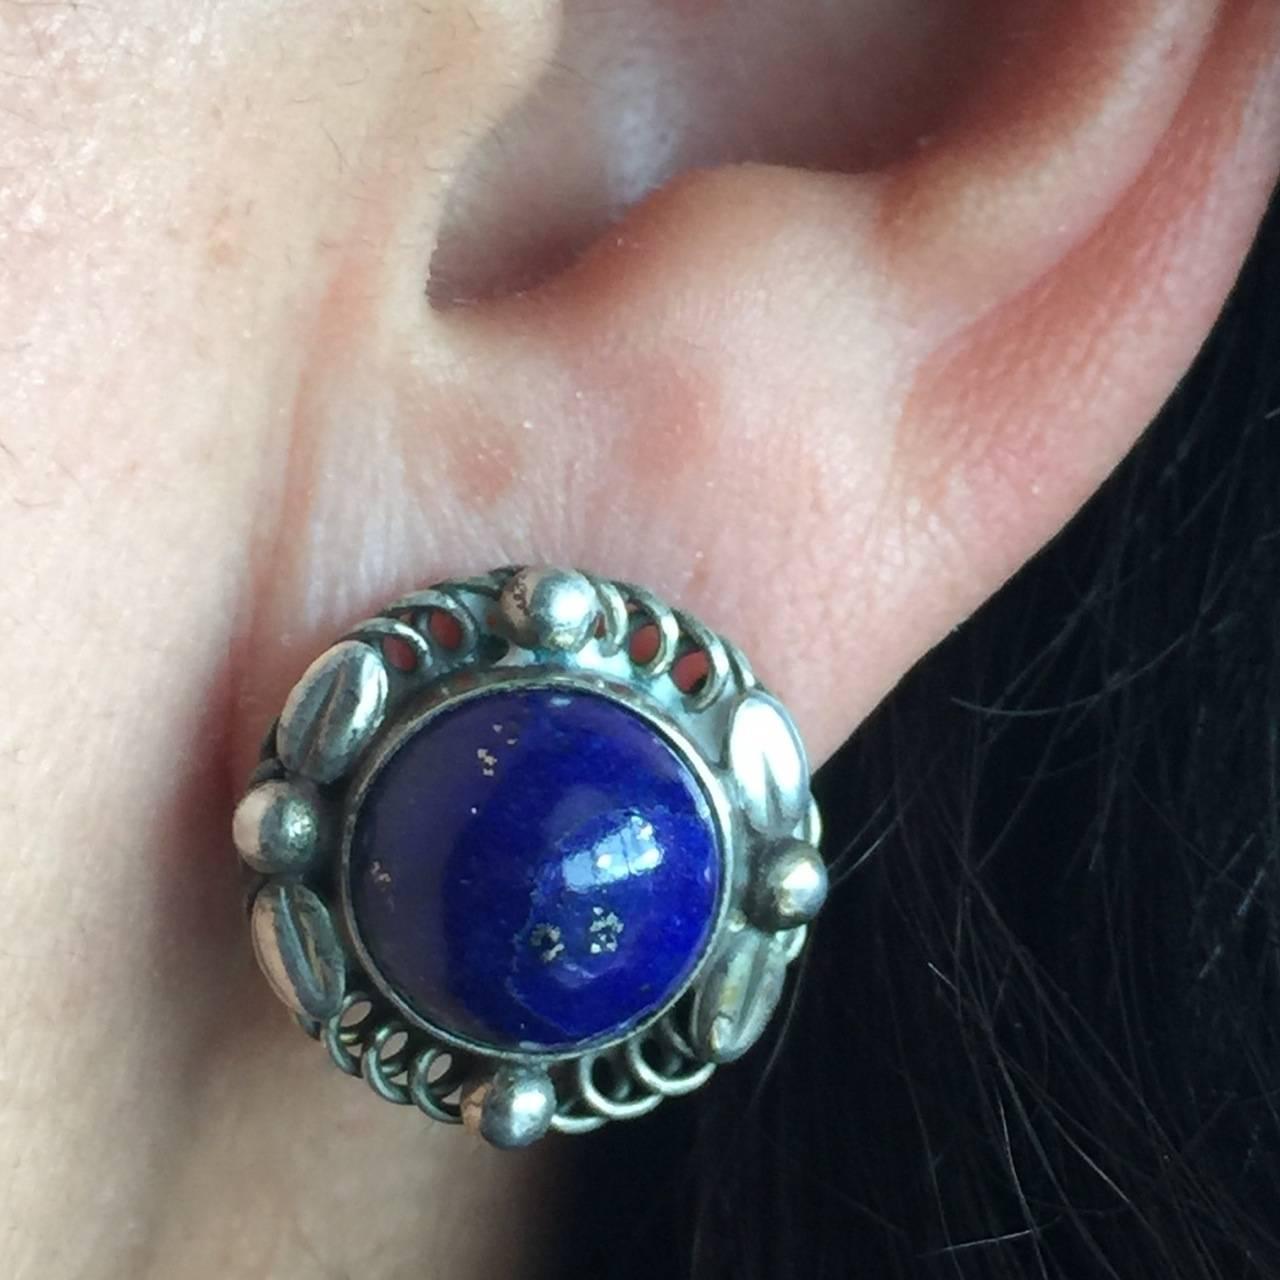 Georg Jensen Sterling Silver Earrings No. 39B with Lapis Lazuli

Classic Jensen design with a beautiful lapis lazuli stone. These are screw back but can be converted to omega back.

We have a ring in the same design in stock to compliment these